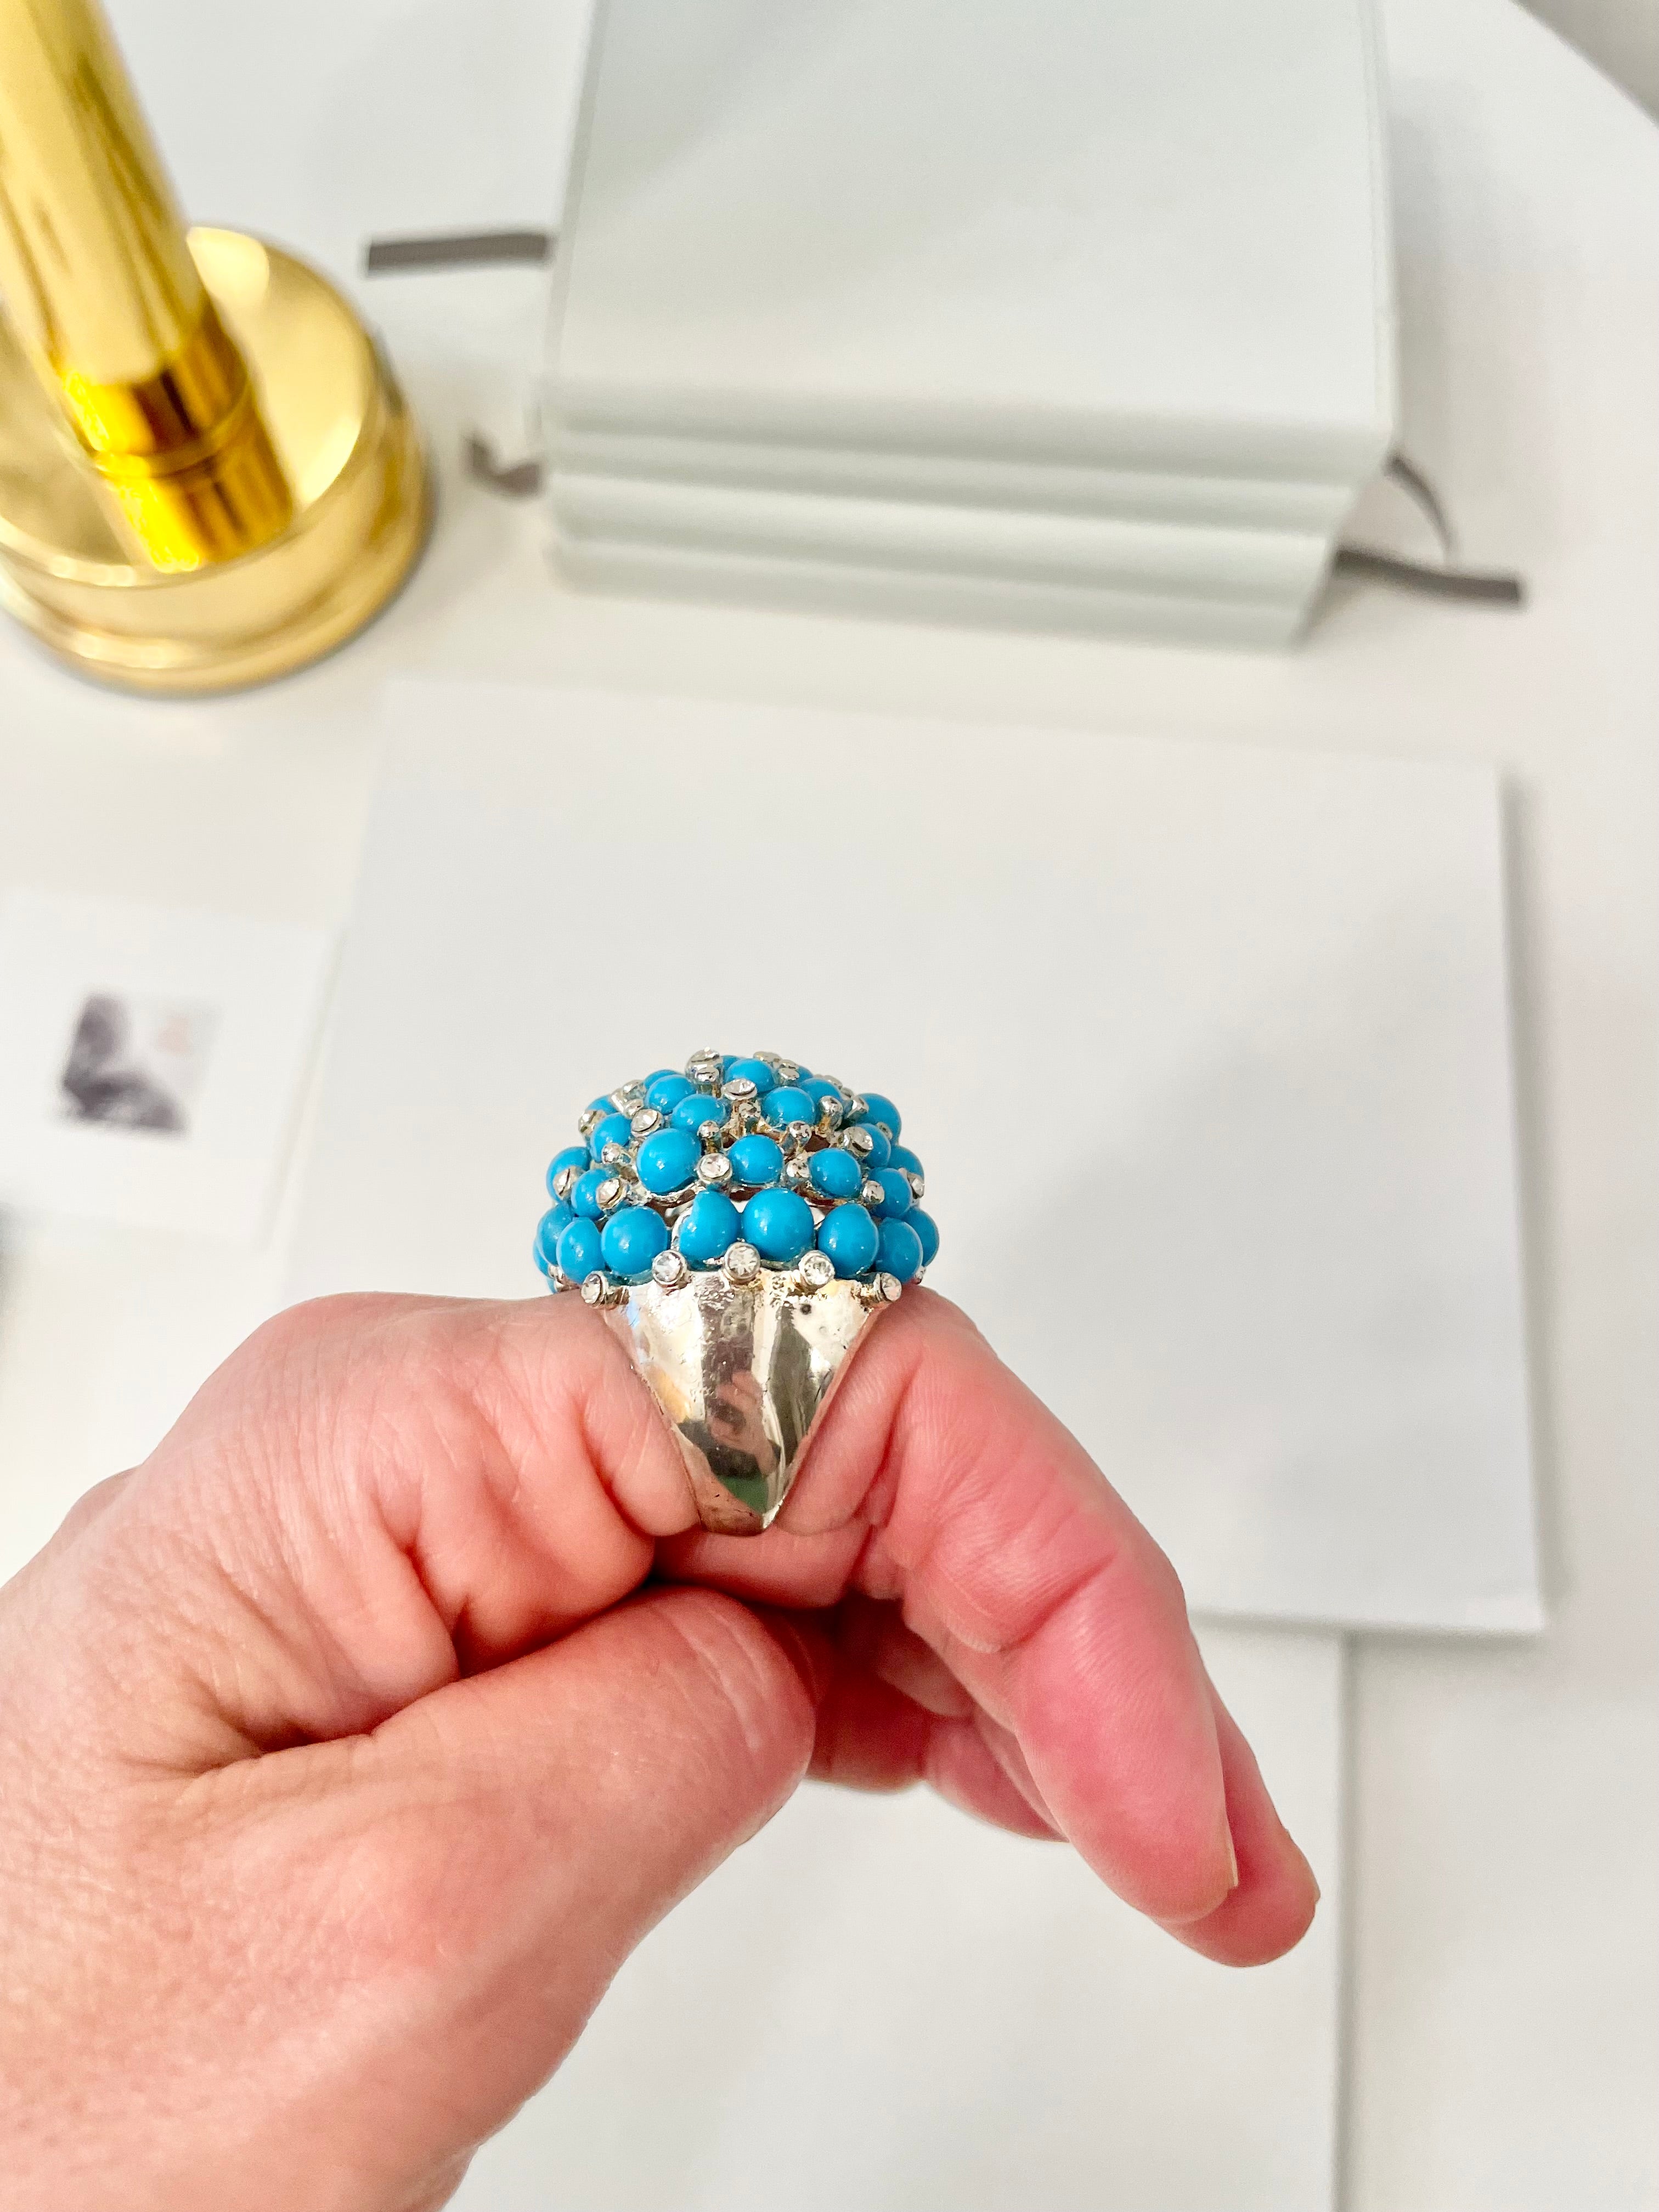 The Happy Hostess and her colorful life...this large faux turquoise cocktail ring is making all ladies gitty!